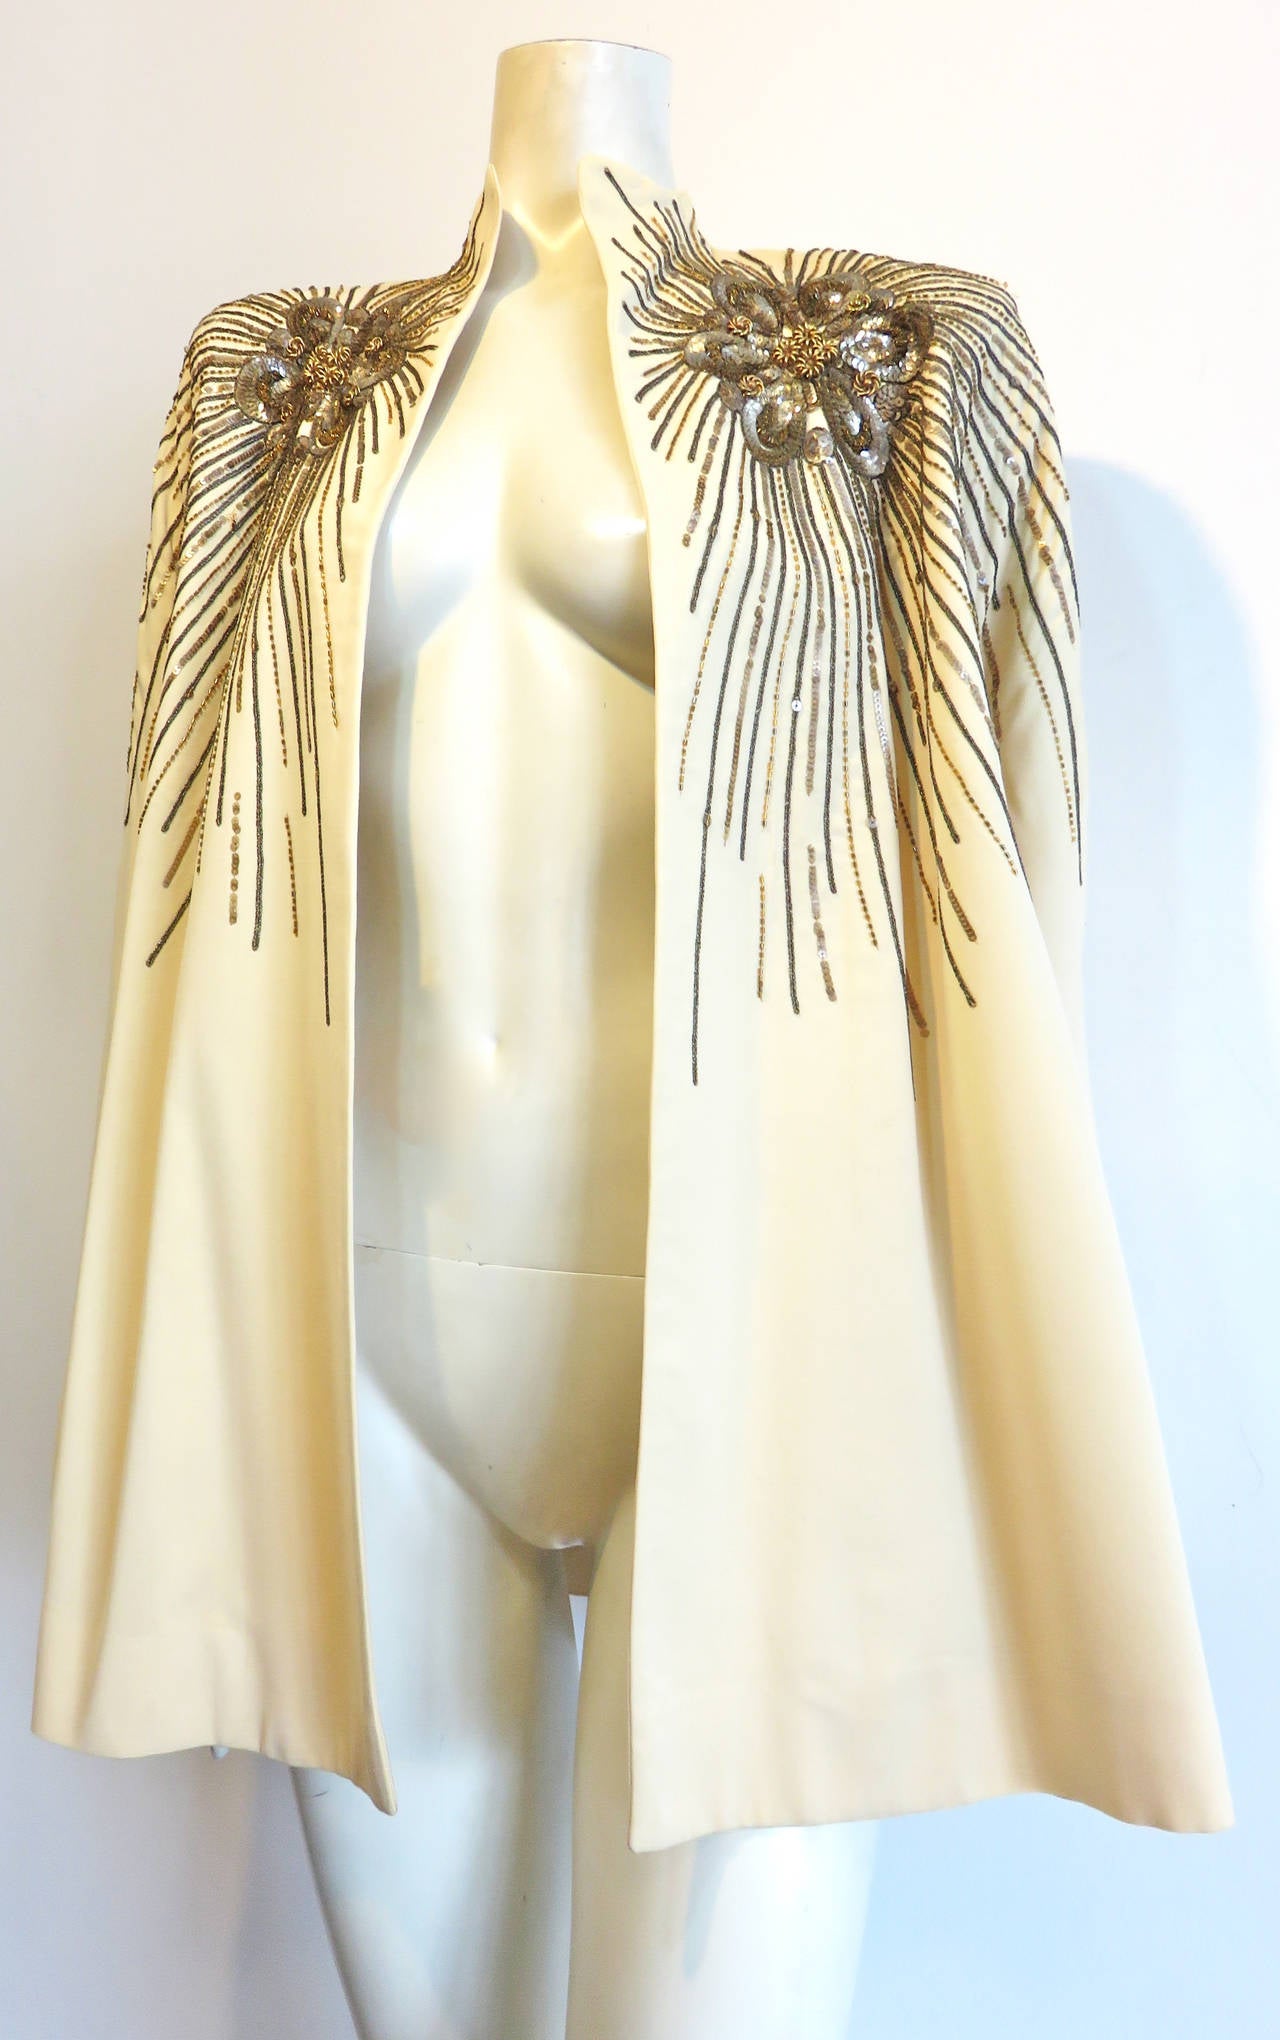 Early 1940's, BONWIT TELLER, Schiaparelli inspired swing coat.

Designed approximately 2 years after Elsa Schiaparelli's 'Apollo of Versailles' cape of 1938, this Bonwit Teller New York label, swing coat features two beautifully embellished